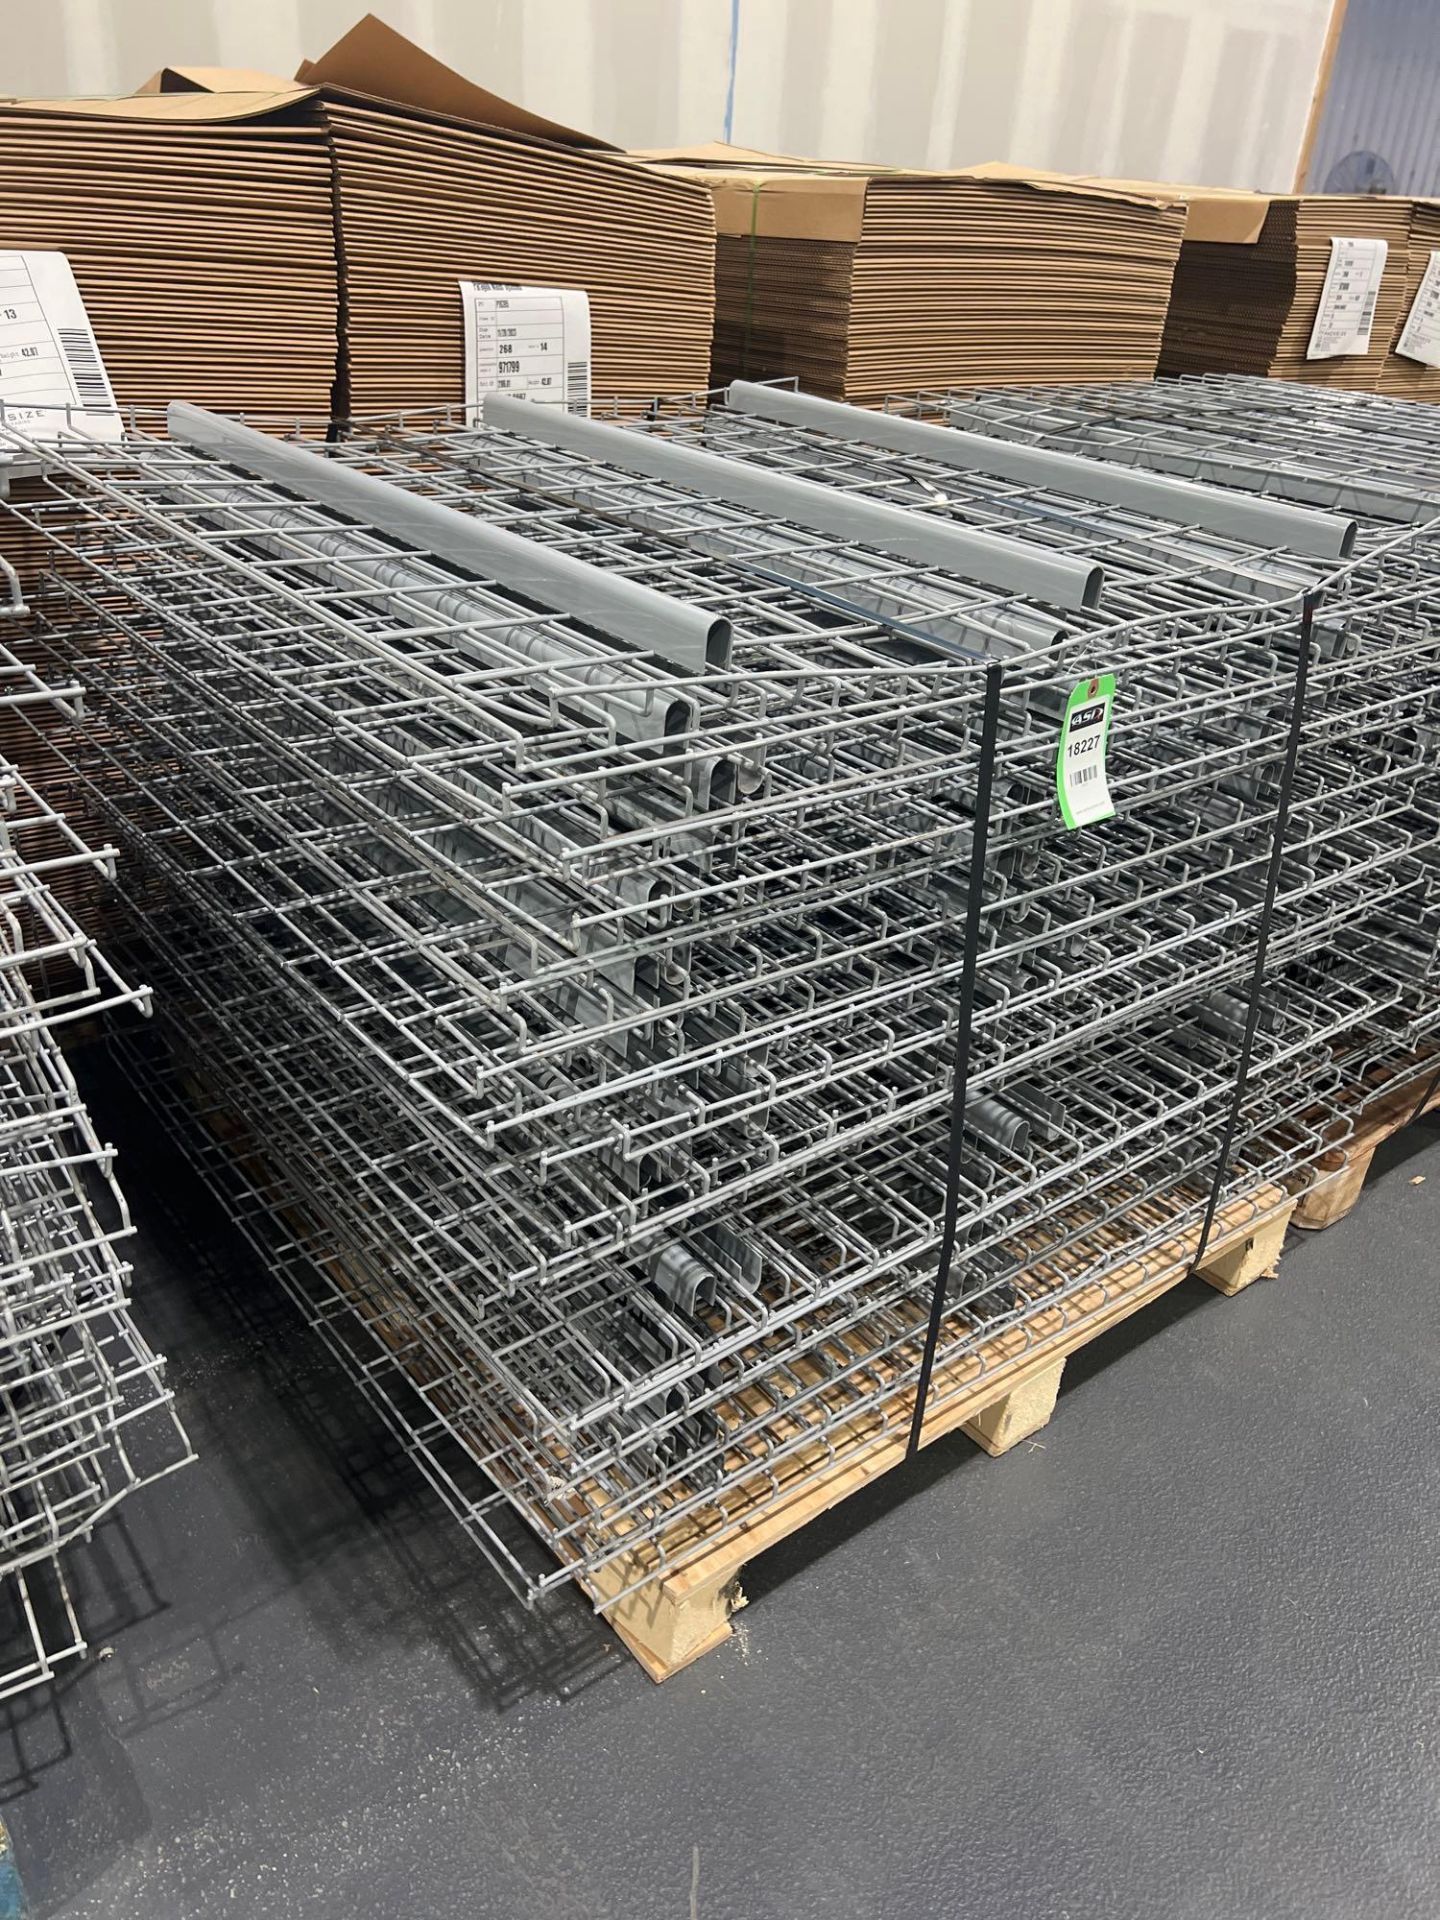 PALLET OF APPROX. 34 WIRE GRATES FOR PALLET RACKING, APPROX. DIMENSIONS 43" X 45" - Image 7 of 7